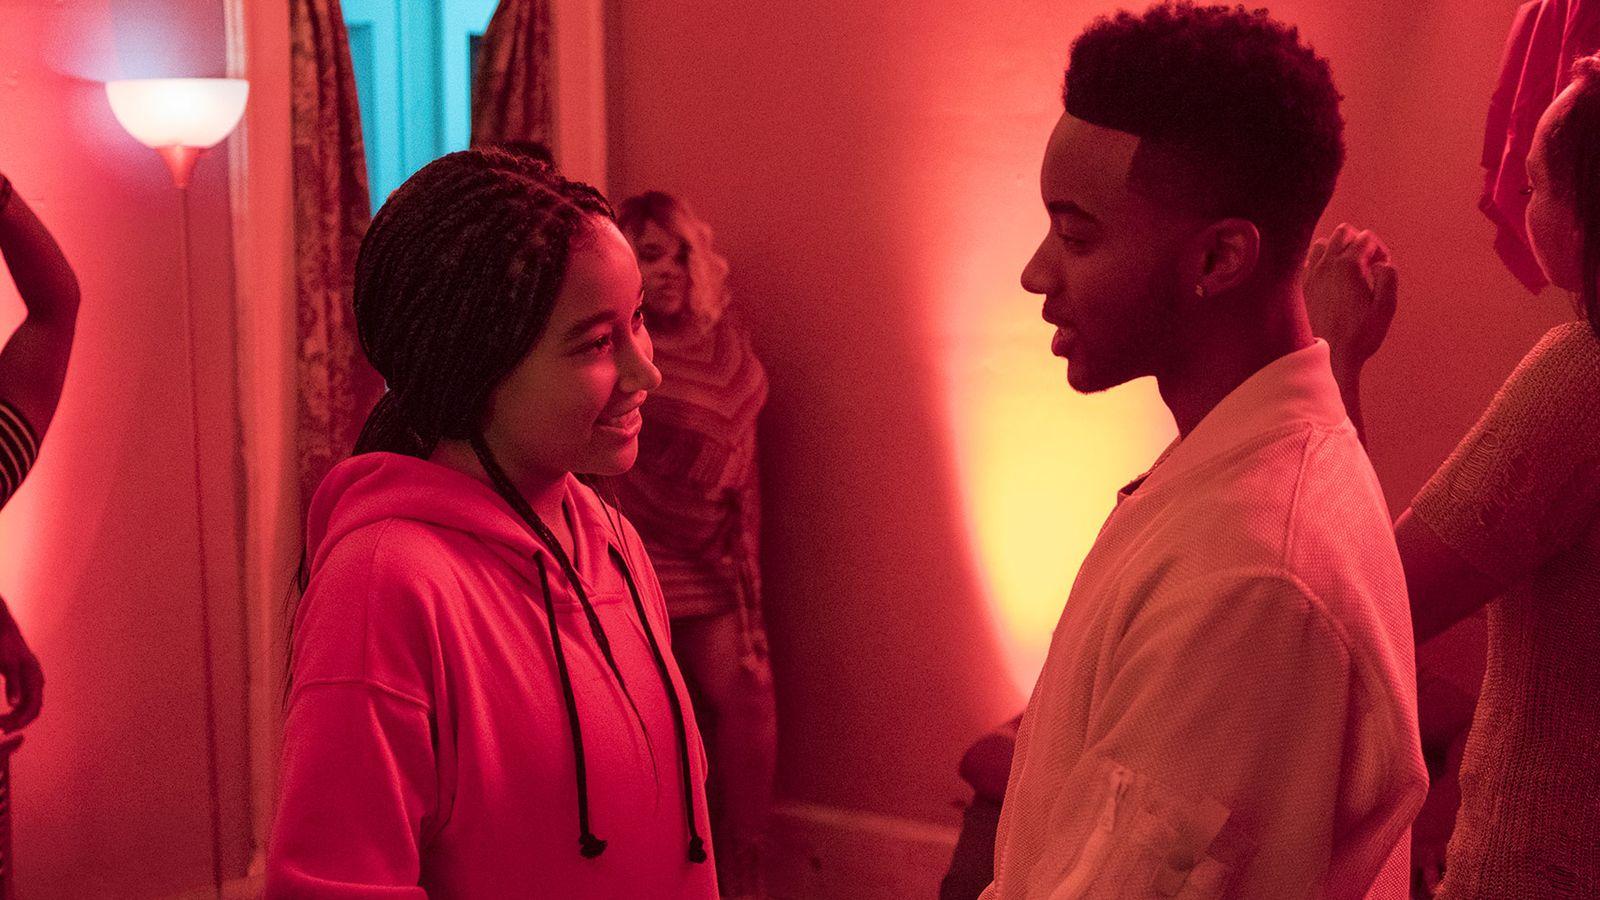 The Hate U Give' explores the media's role in perpetuating harmful